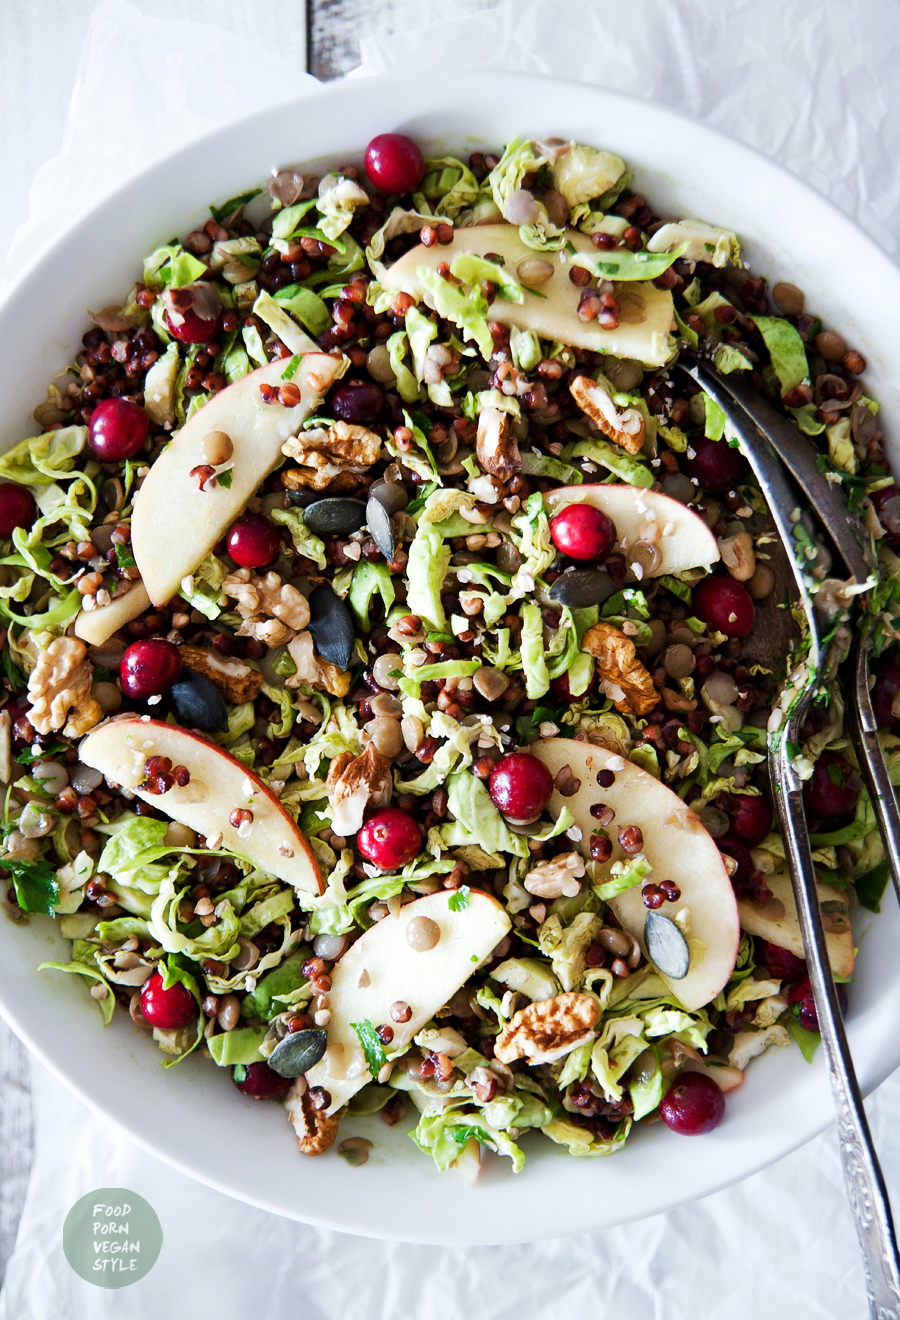 VEGAN AUTUMN SALAD WITH SORGHUM GRAINS, LENTILS, BRUSSELS SPROUTS, CRANBERRIES AND PURYA! RAW PUMPKIN SEED OIL